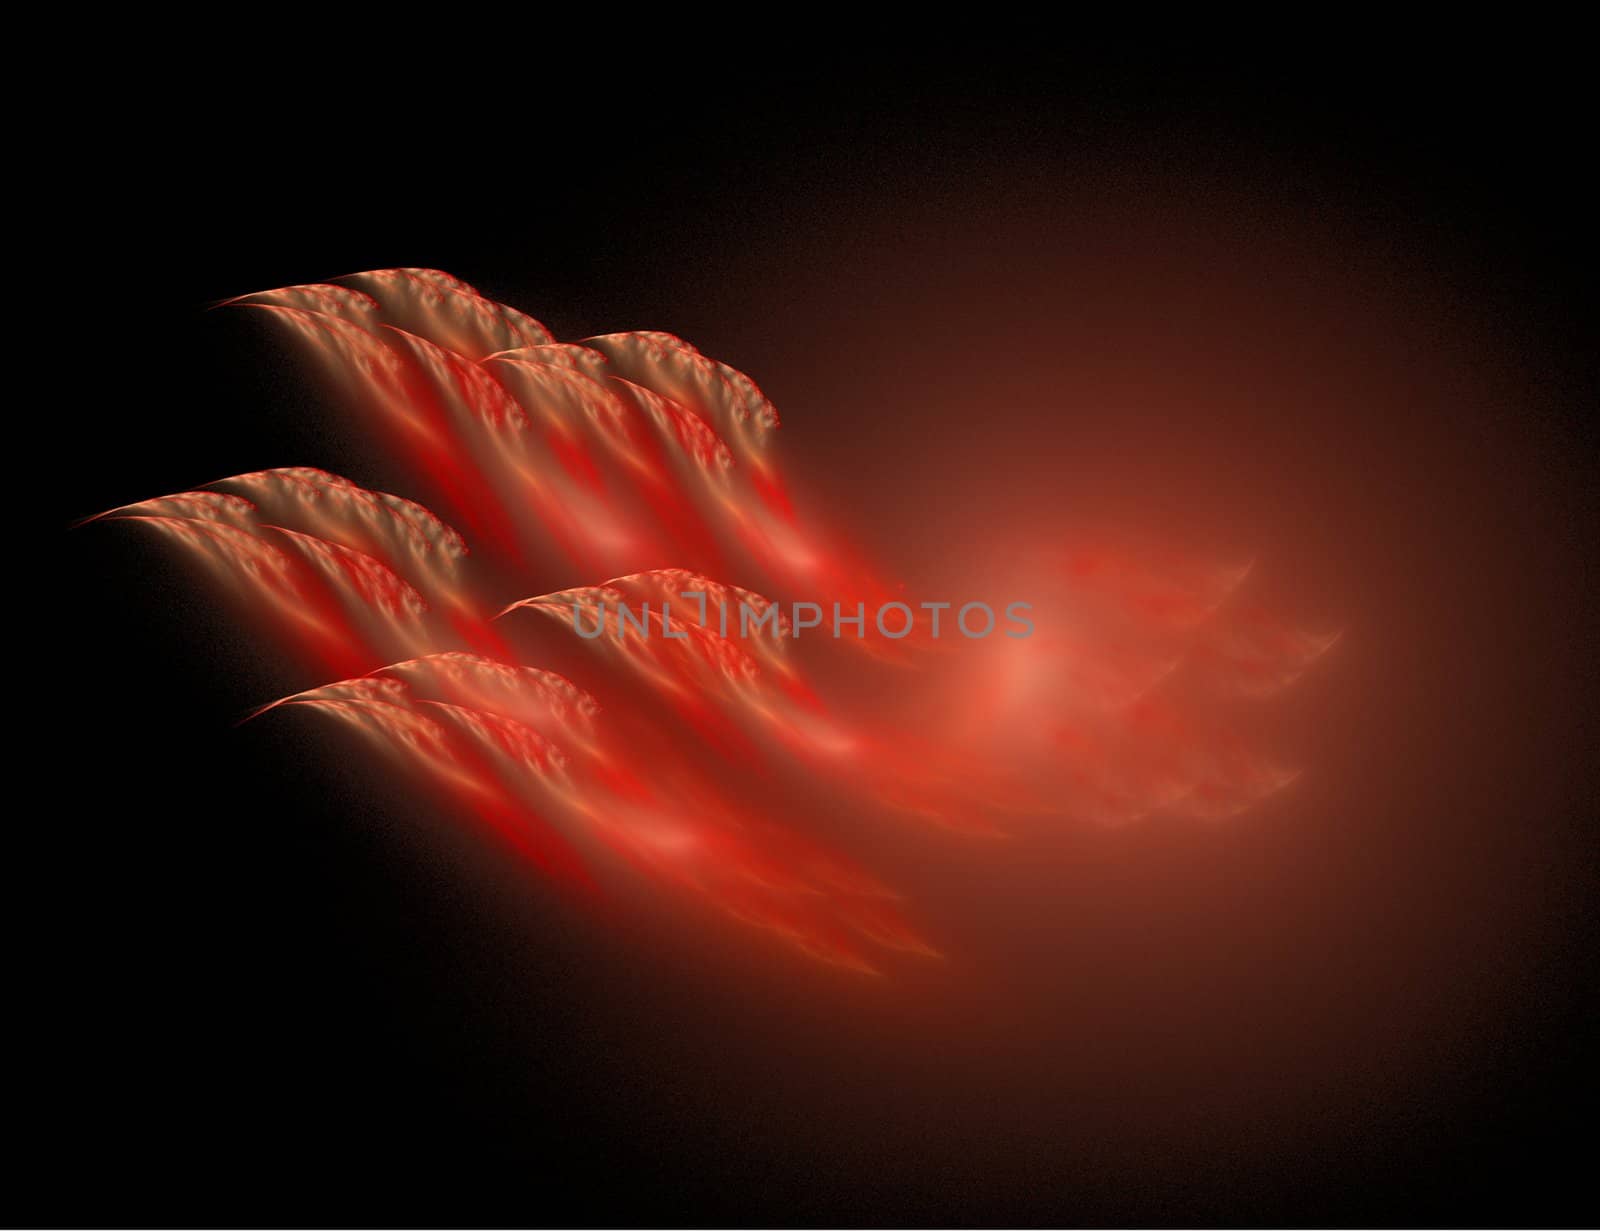 Abstract Five Red Phoenix or Turkeys From the Flames Against a Black Background